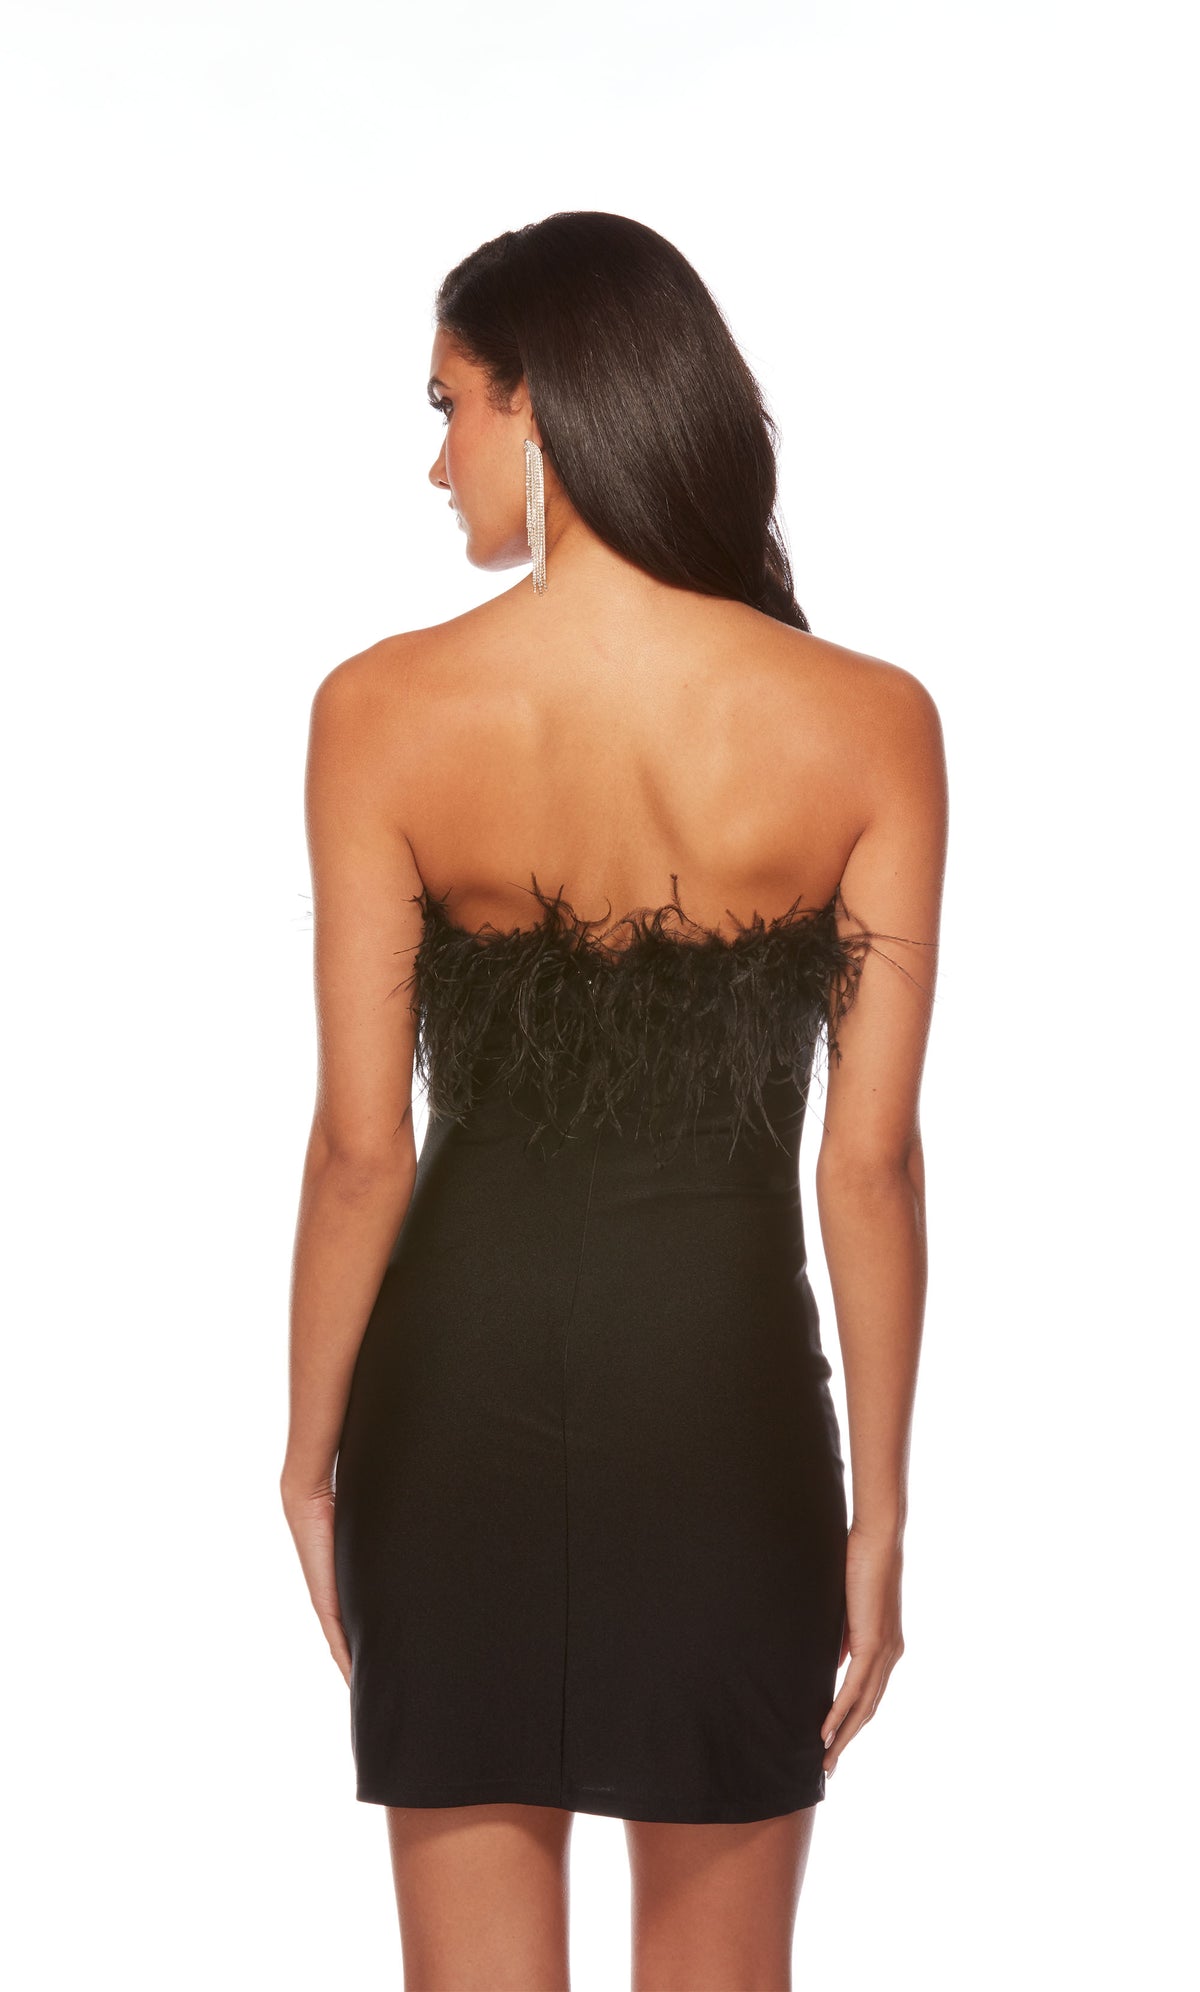 Strapless feather dress with a zip-up back in a black stretch satin fabrication.